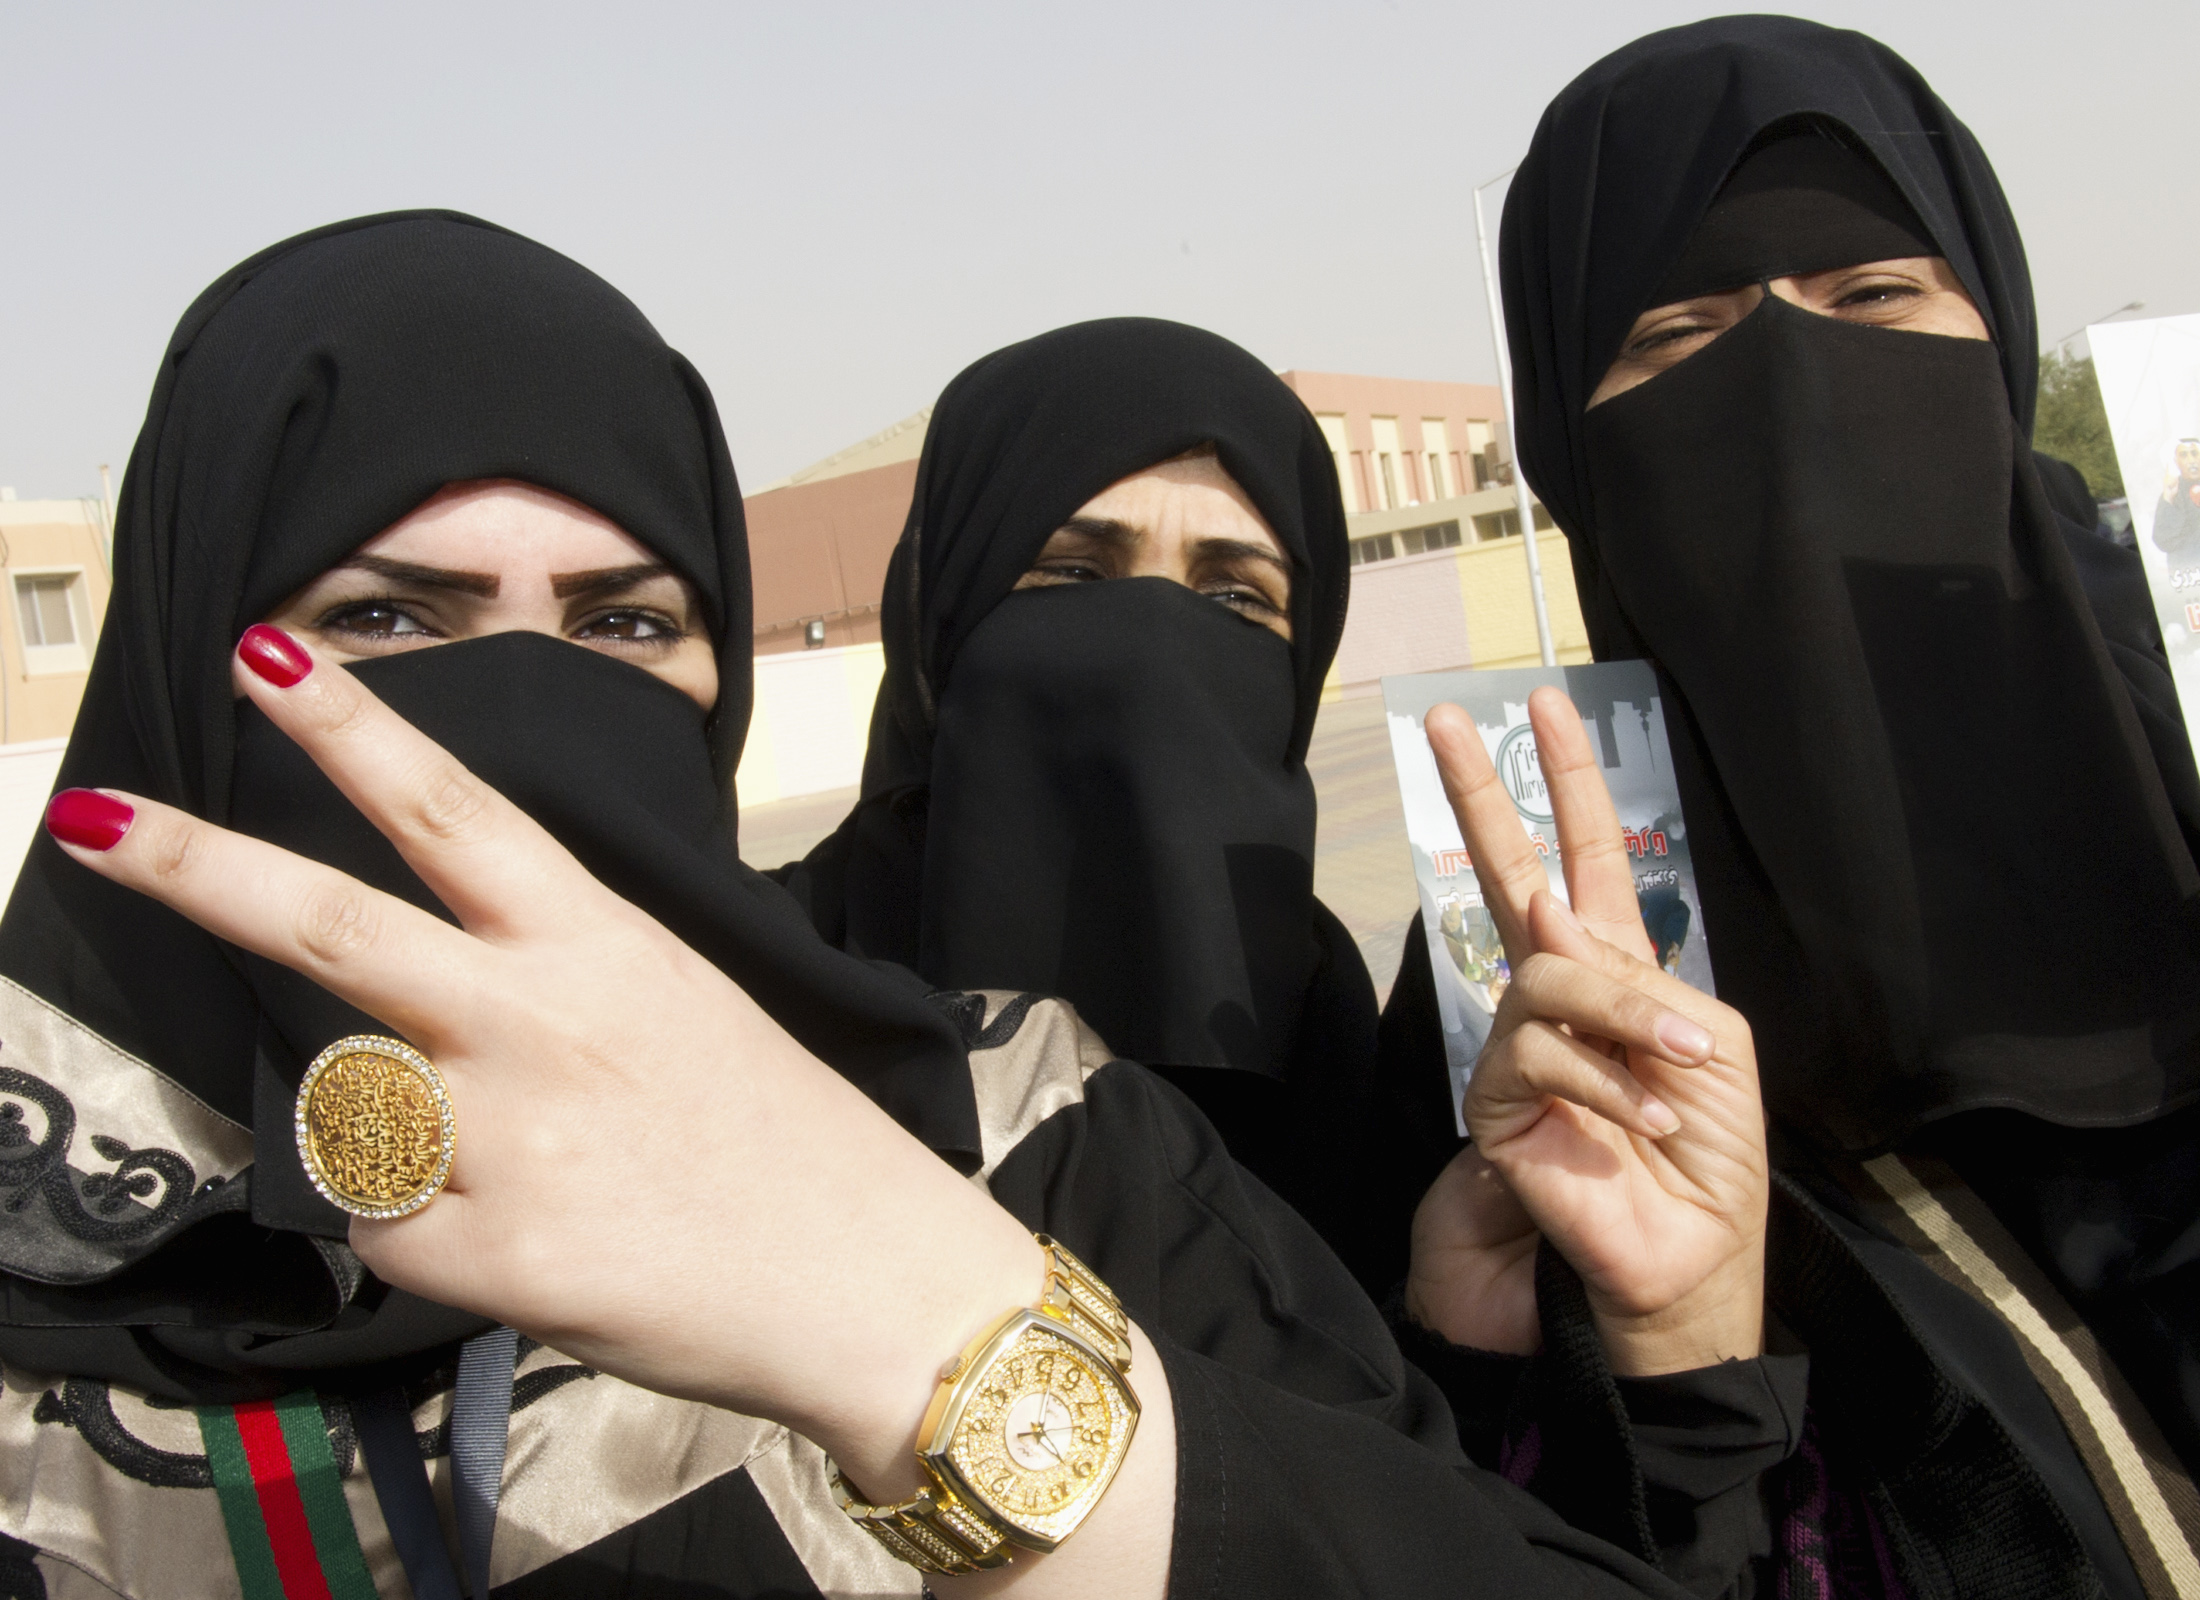 Saudi Arabias Working Women Propose Their Own City Because Theyre Tired of Waiting Autostraddle image image